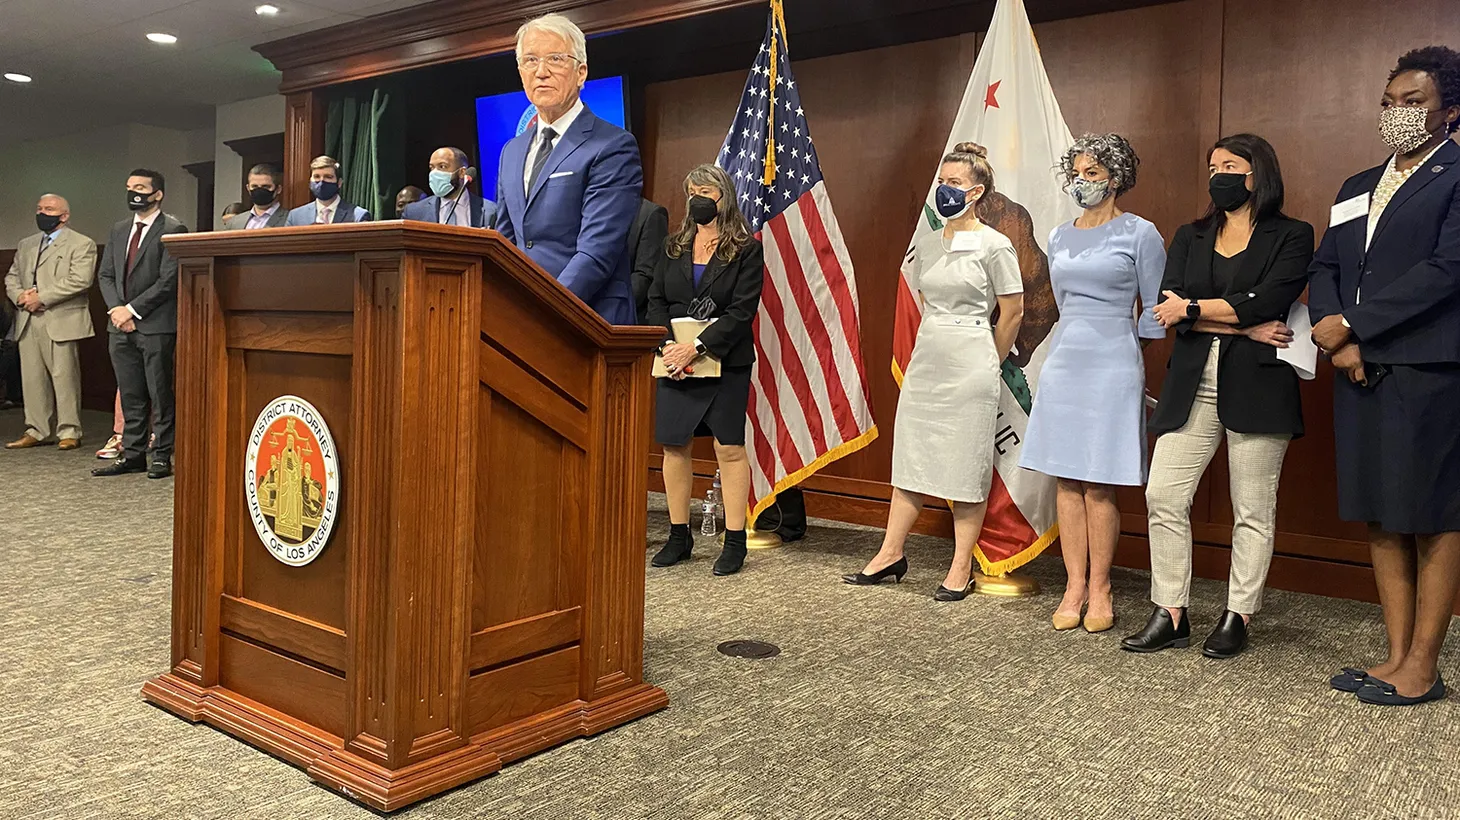 With other progressive district attorneys from across the country behind him, Los Angeles County District Attorney George Gascón holds a press conference to mark his first year in office. He used the occasion to respond to critics and to promise supporters that he would continue with his criminal justice reforms.